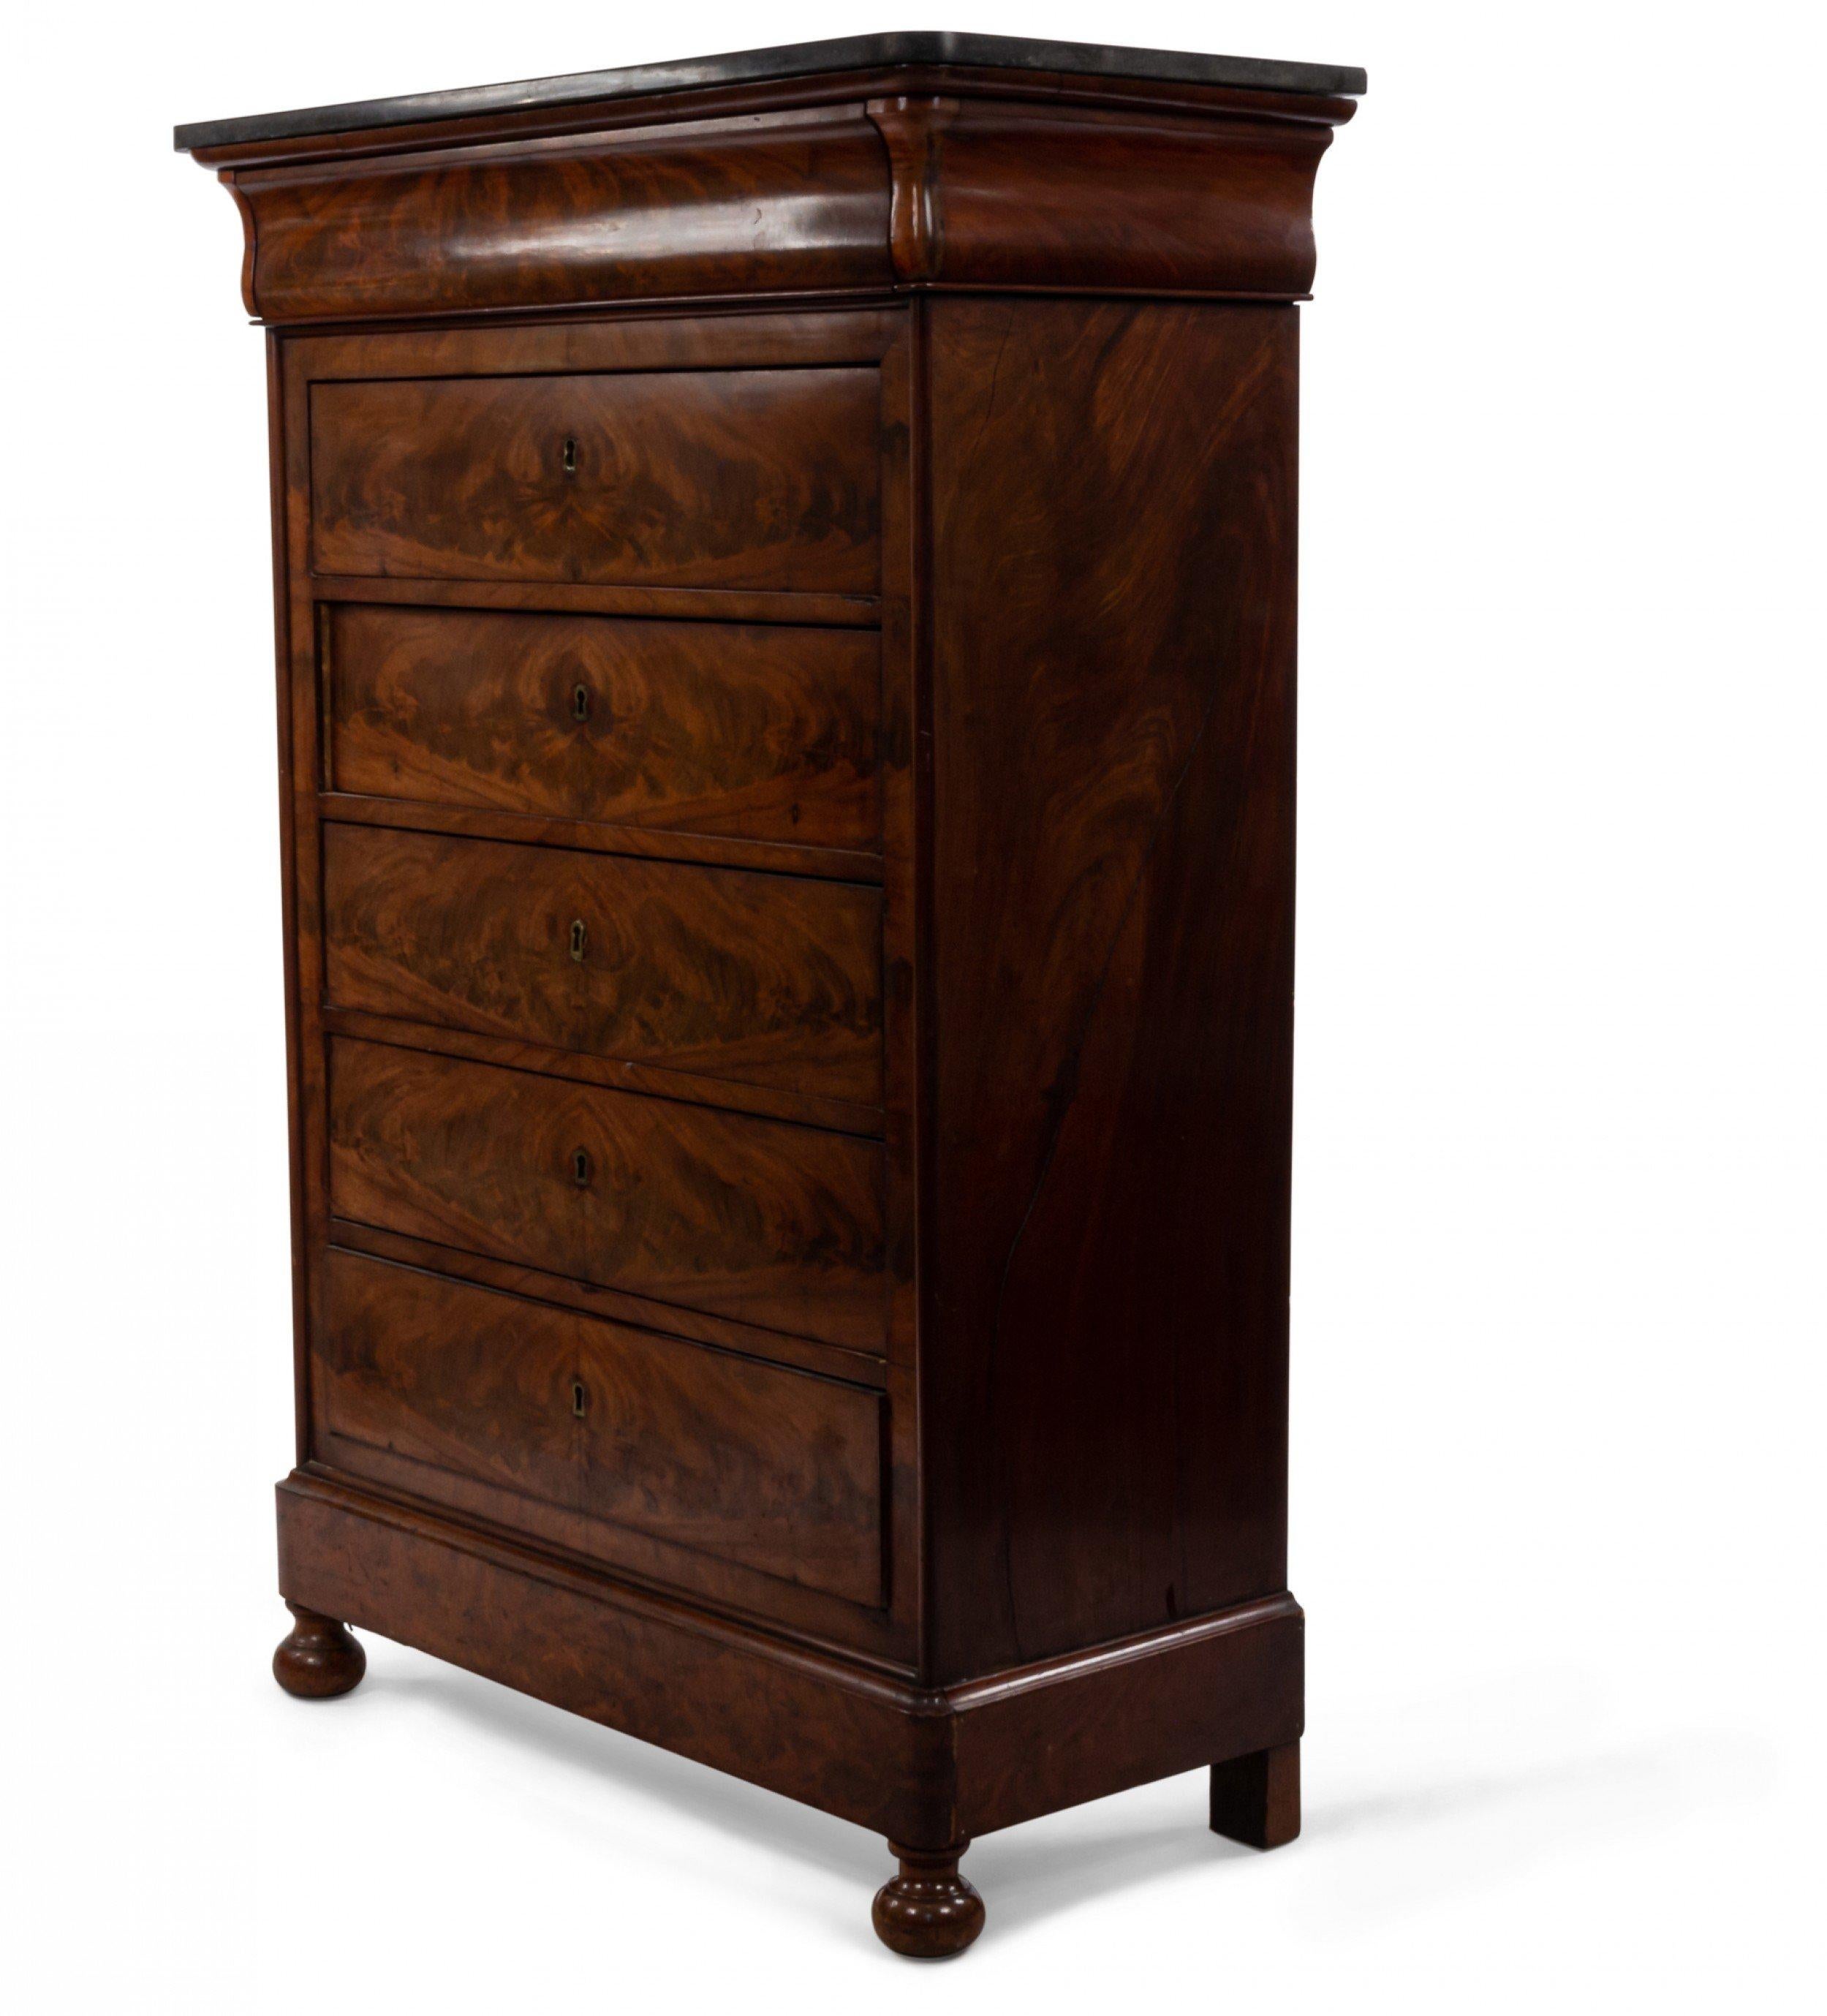 American Federal mahogany veneer mid-19th century chest of drawers with five drawers and brass escutcheons supported on a base with front bun feet with a black marble top.